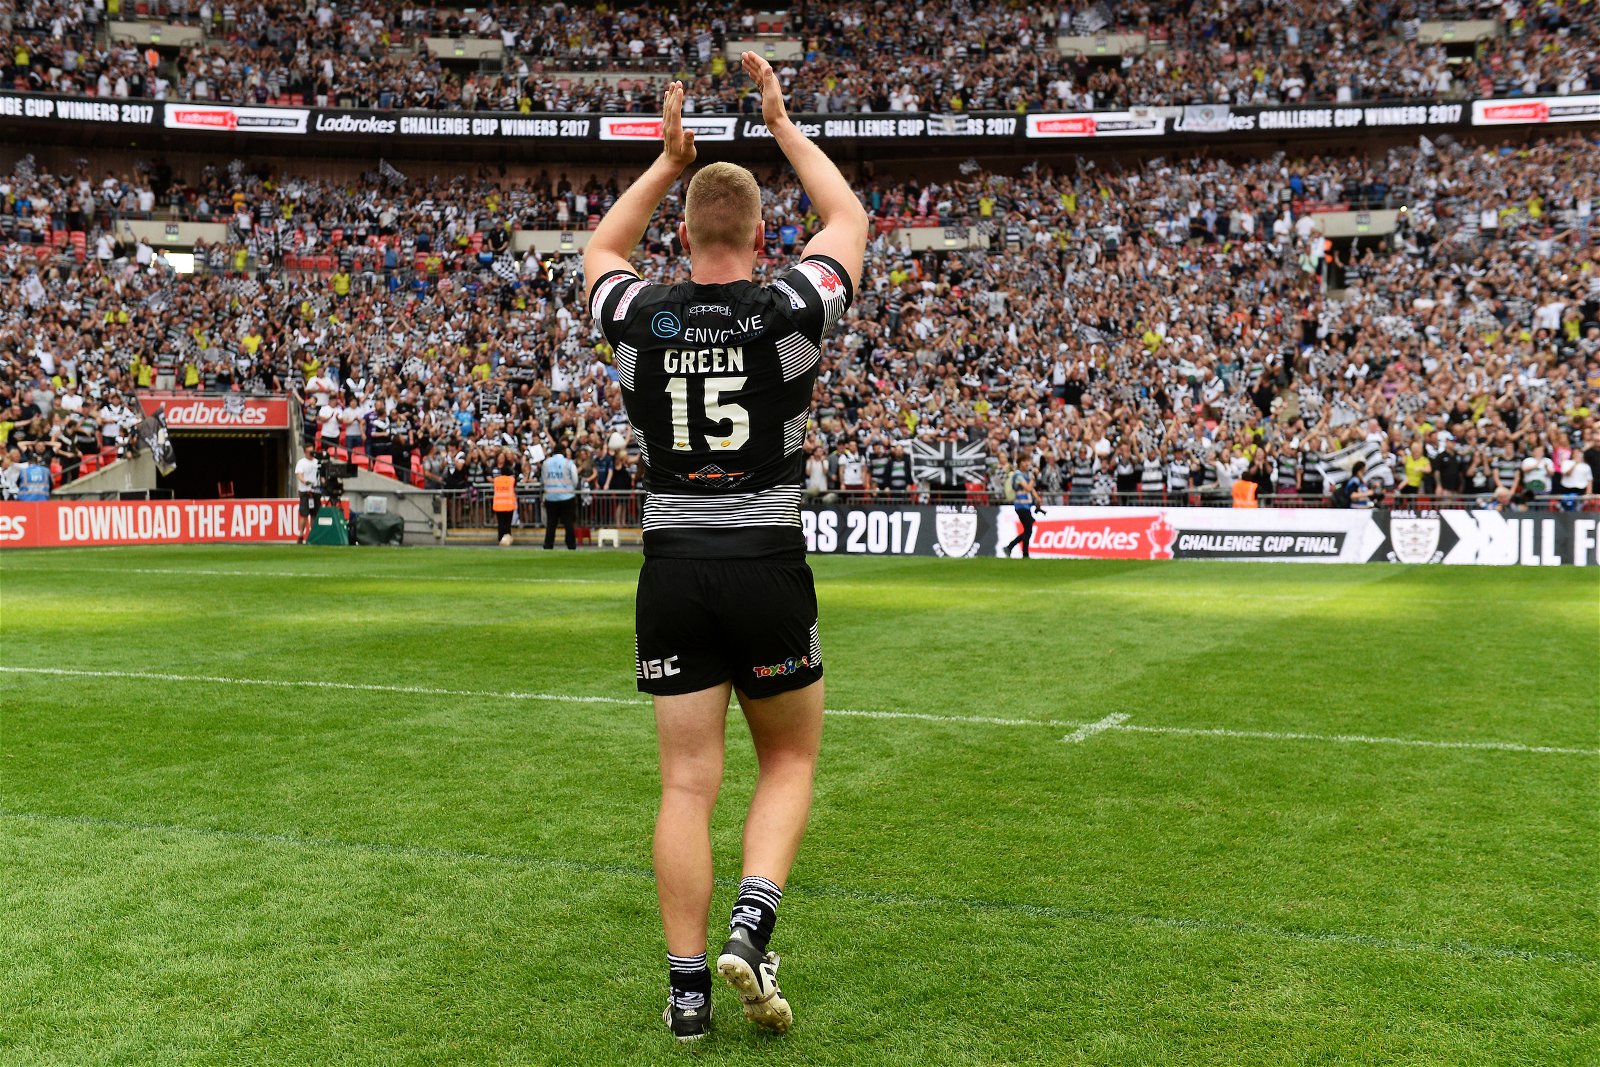 Chris Green of Hull FC, seen from behind, wearing traditional black and white, applauds fans at Wembley Stadium